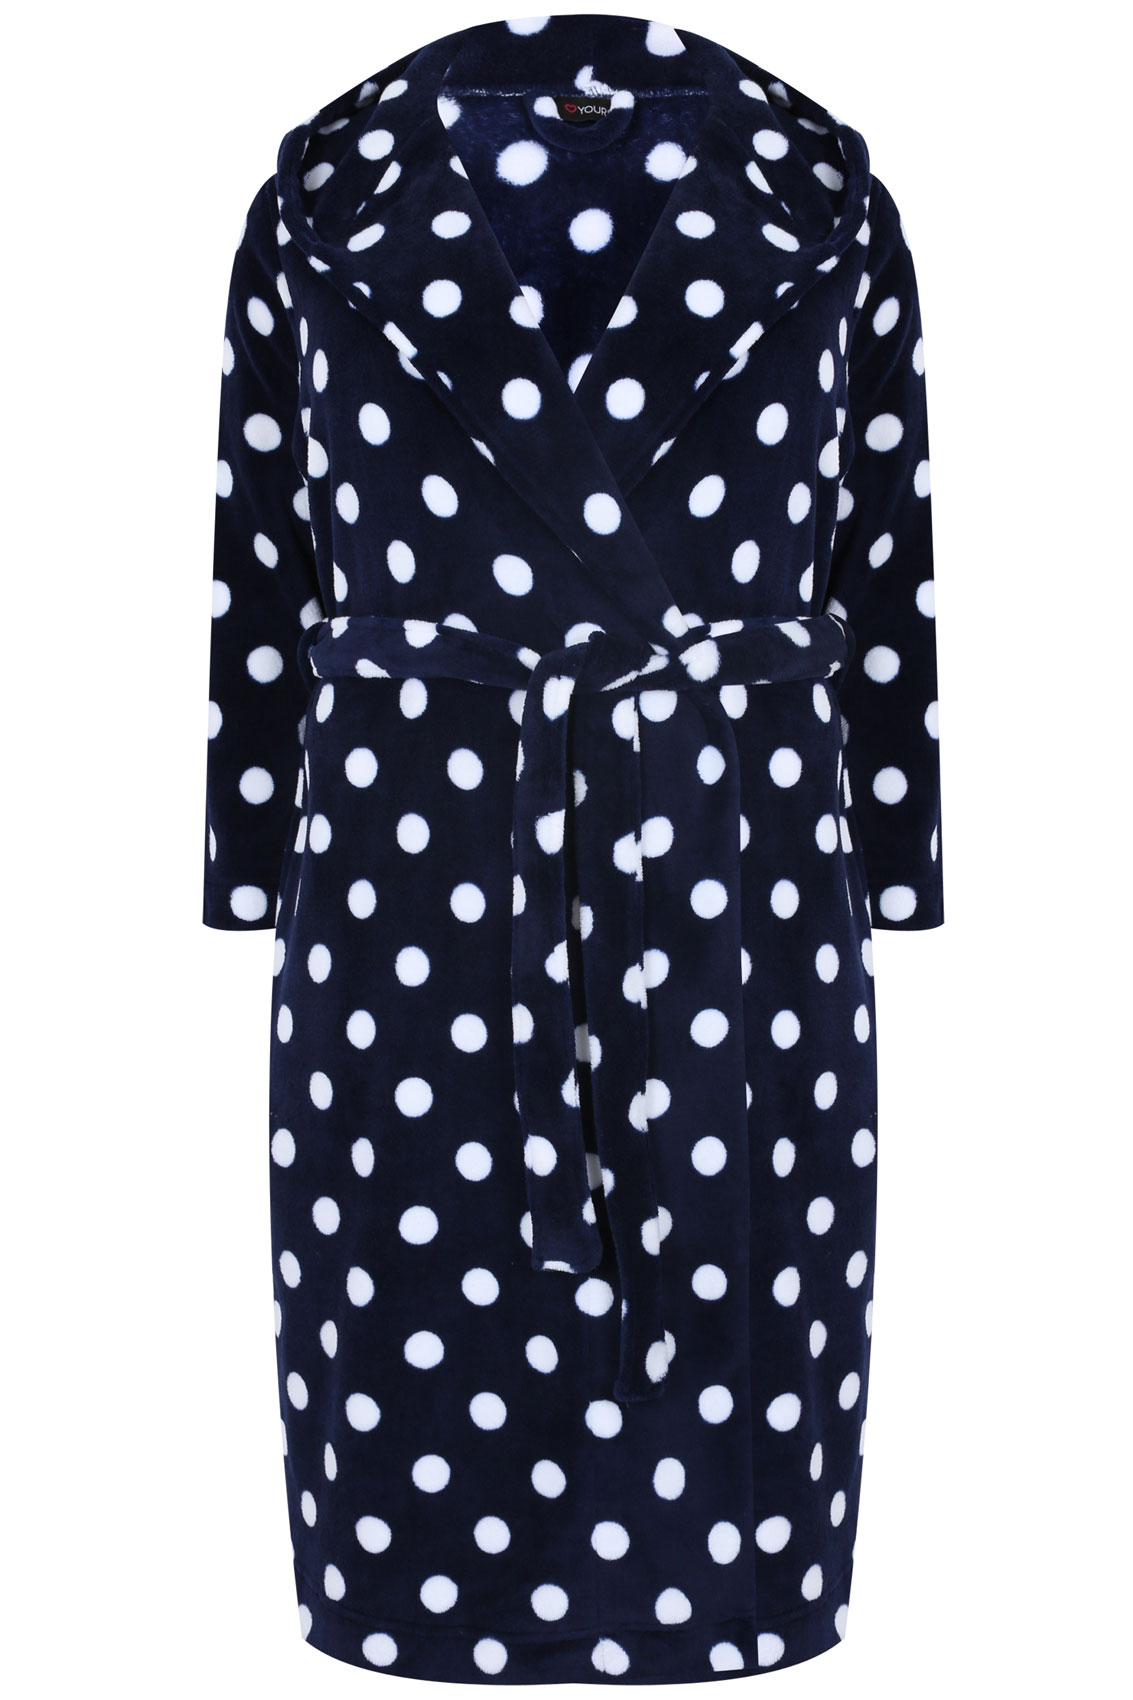 Navy & White Spotted Fleece Dressing Gown Plus Size 14,16,18,20,22,24 ...